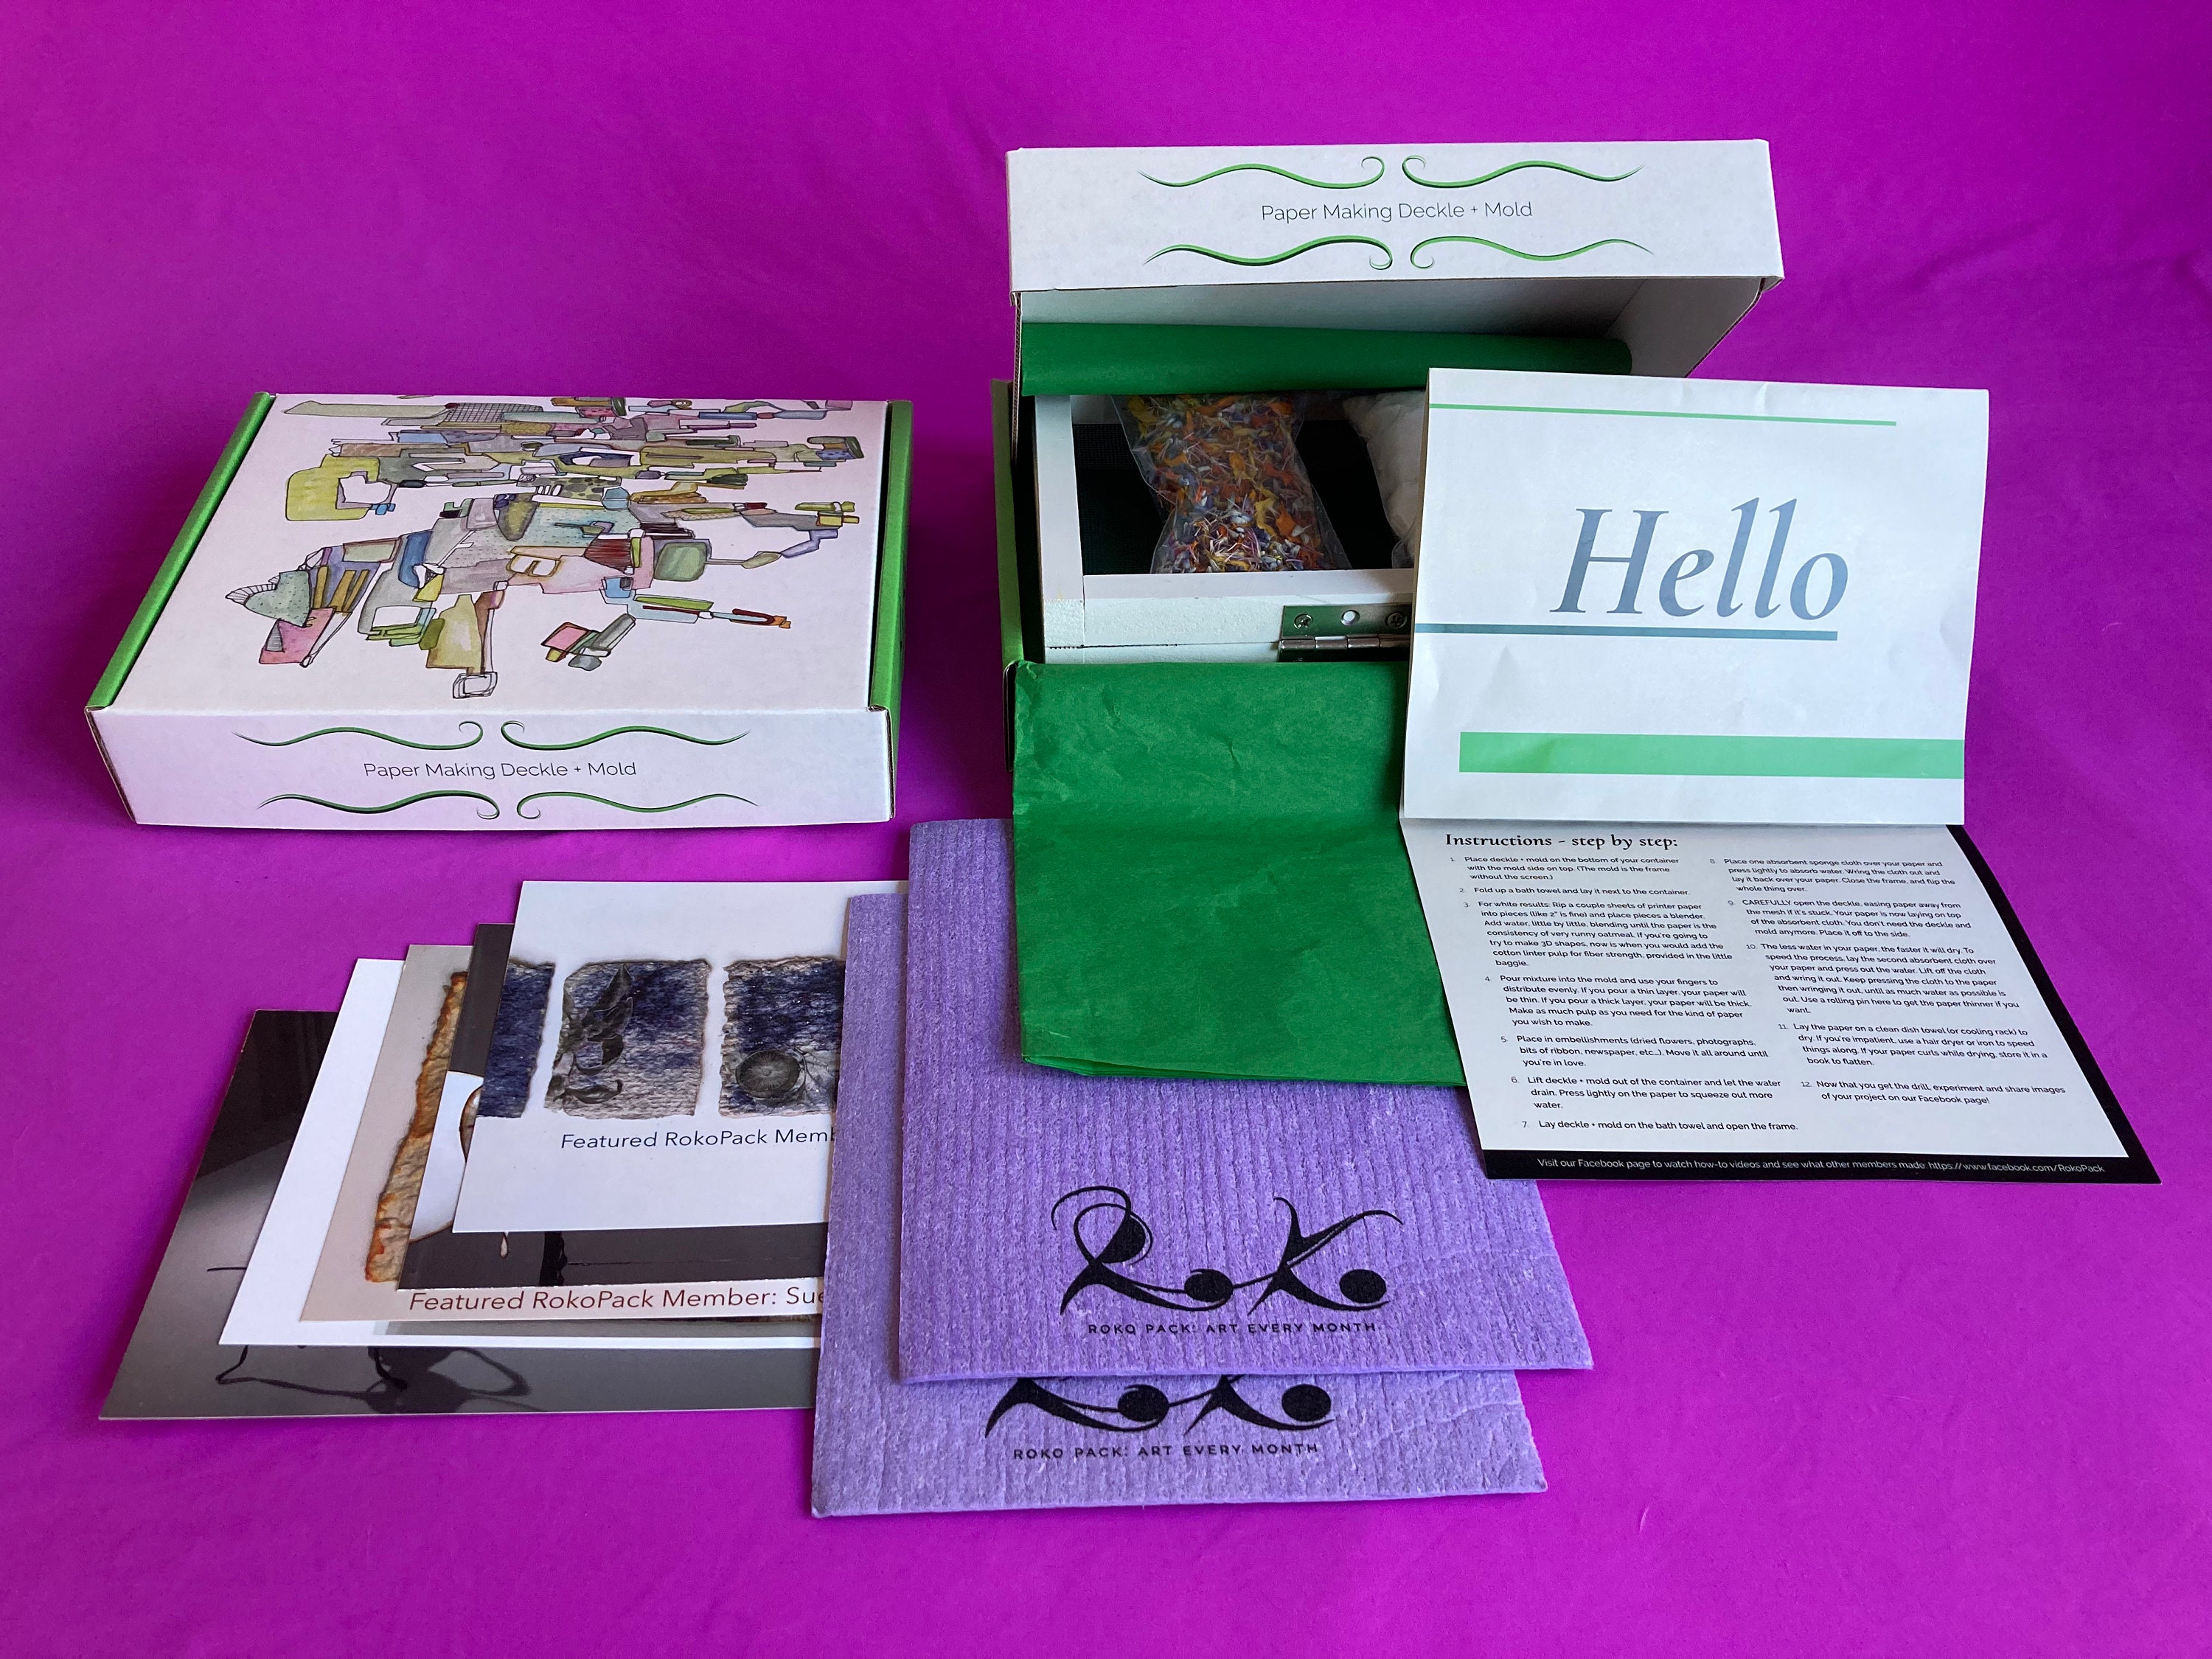 Papermaking Kit, Homemade Paper, Recycled Paper, Diy Kits for Adults, Eco  Friendly Products, Teacher Gift 